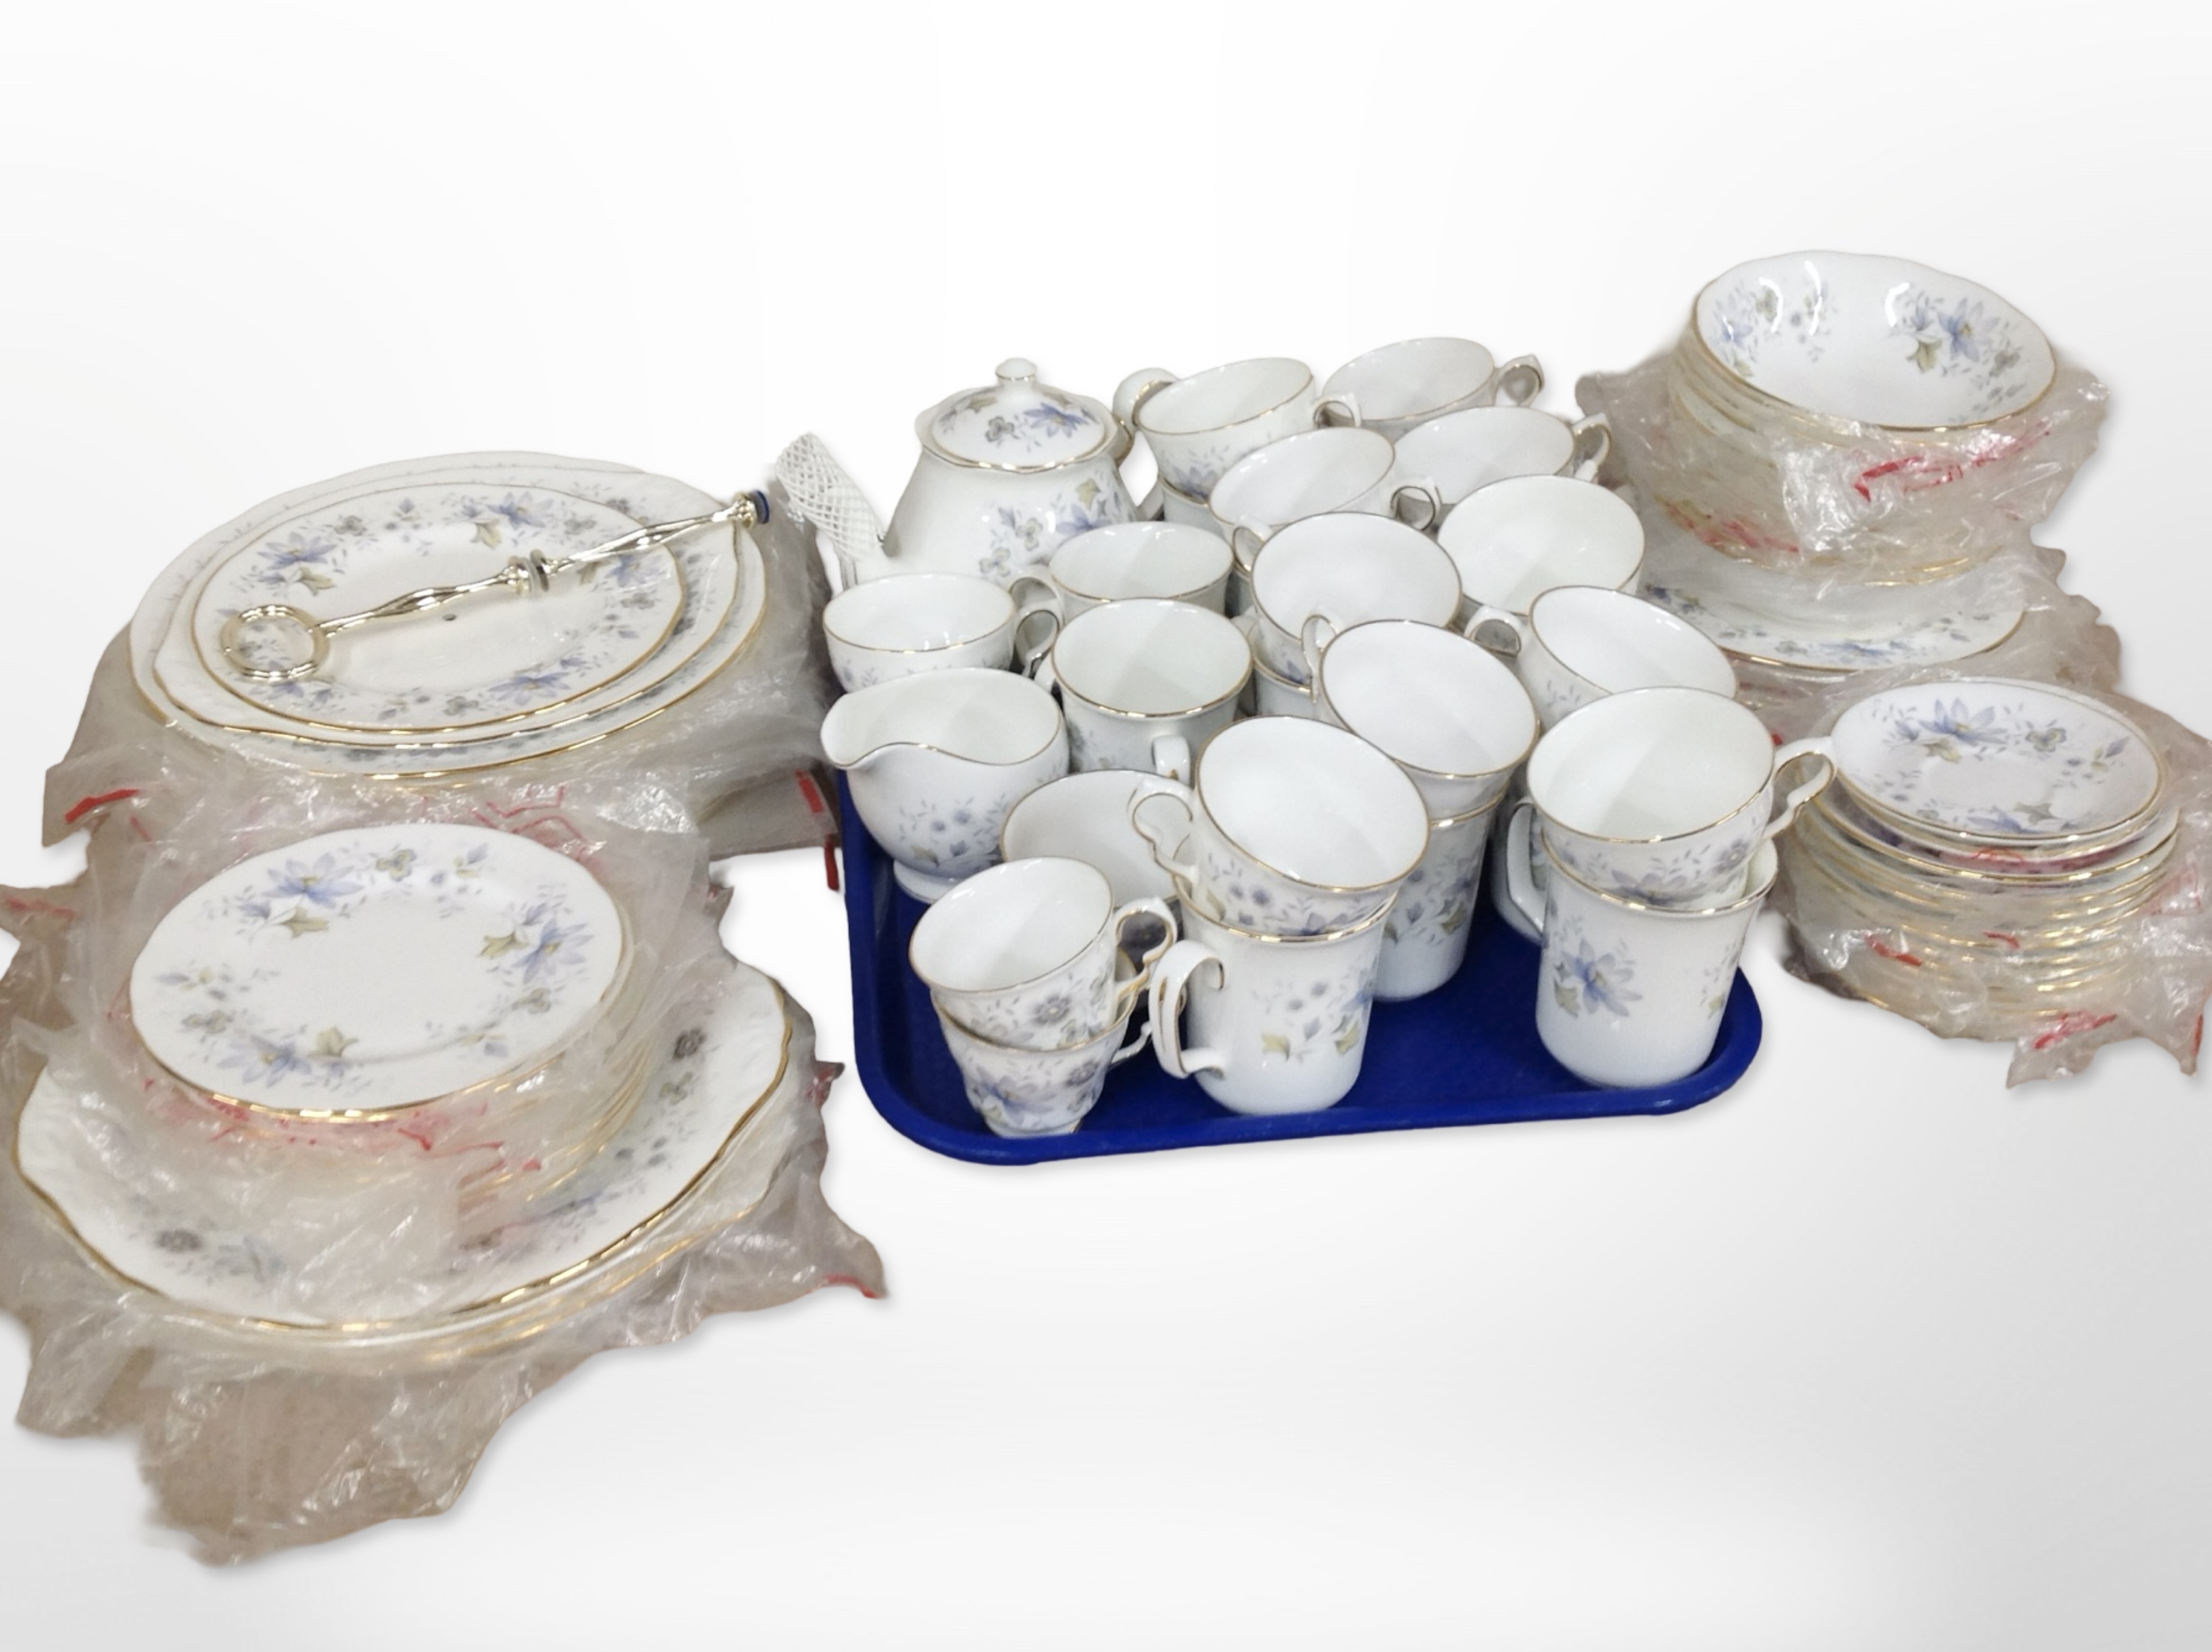 Approximately 100 pieces of Colclough Rhapsody in Blue tea, coffee and dinner porcelain.